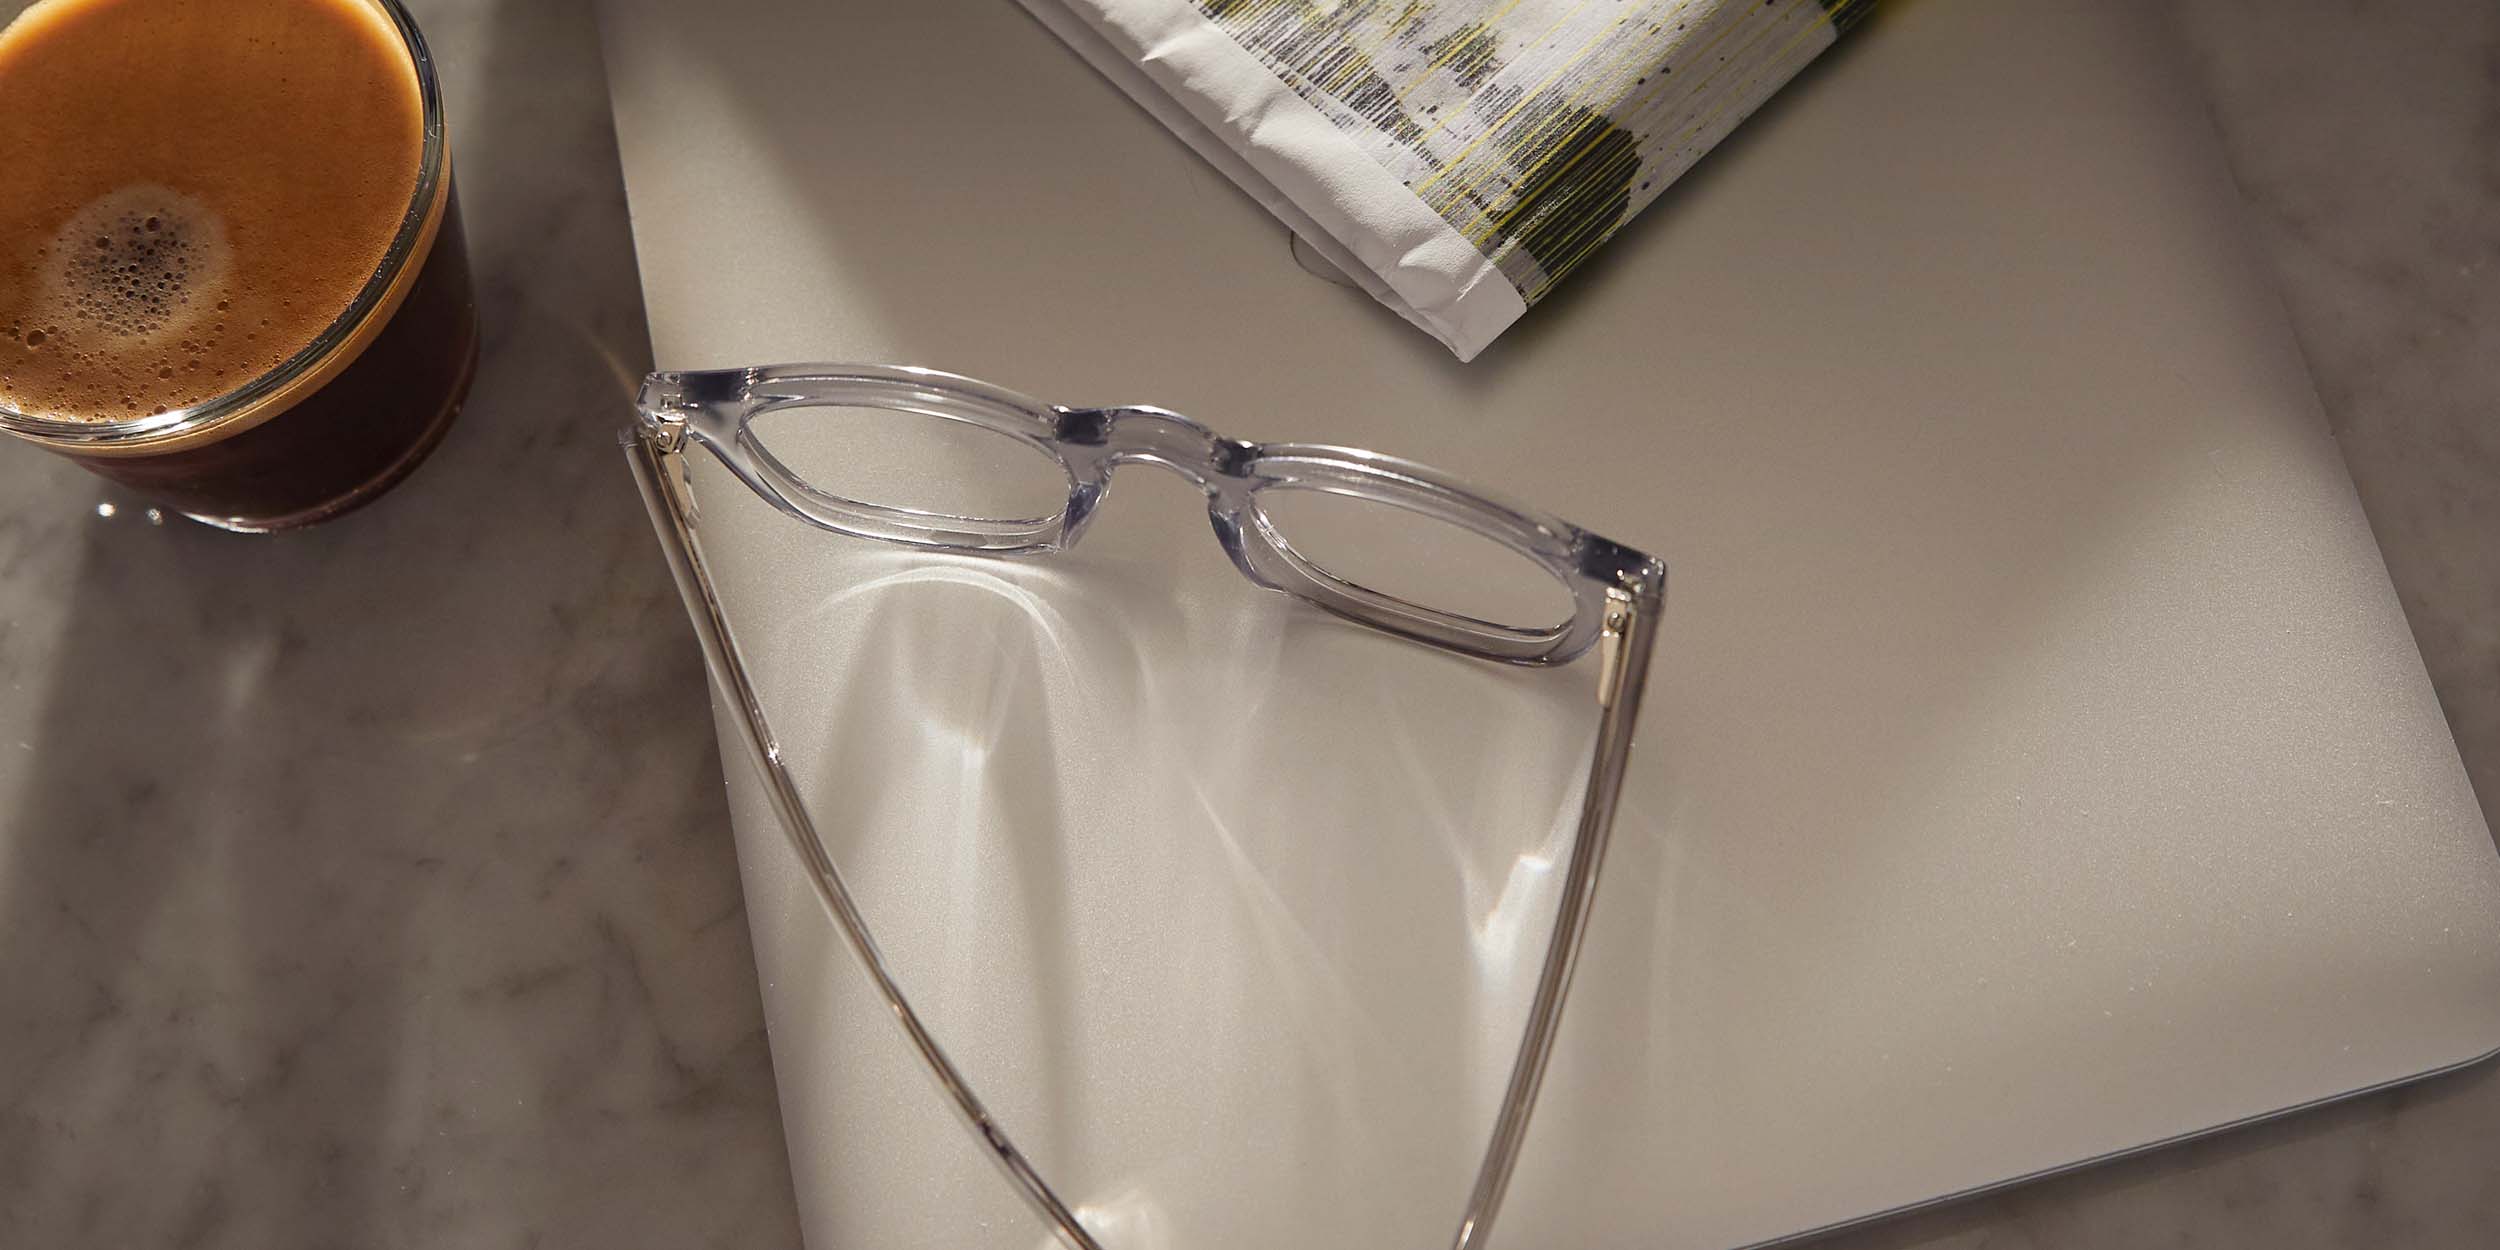 Photo Details of Thomas Grey Tortoise Reading Glasses in a room